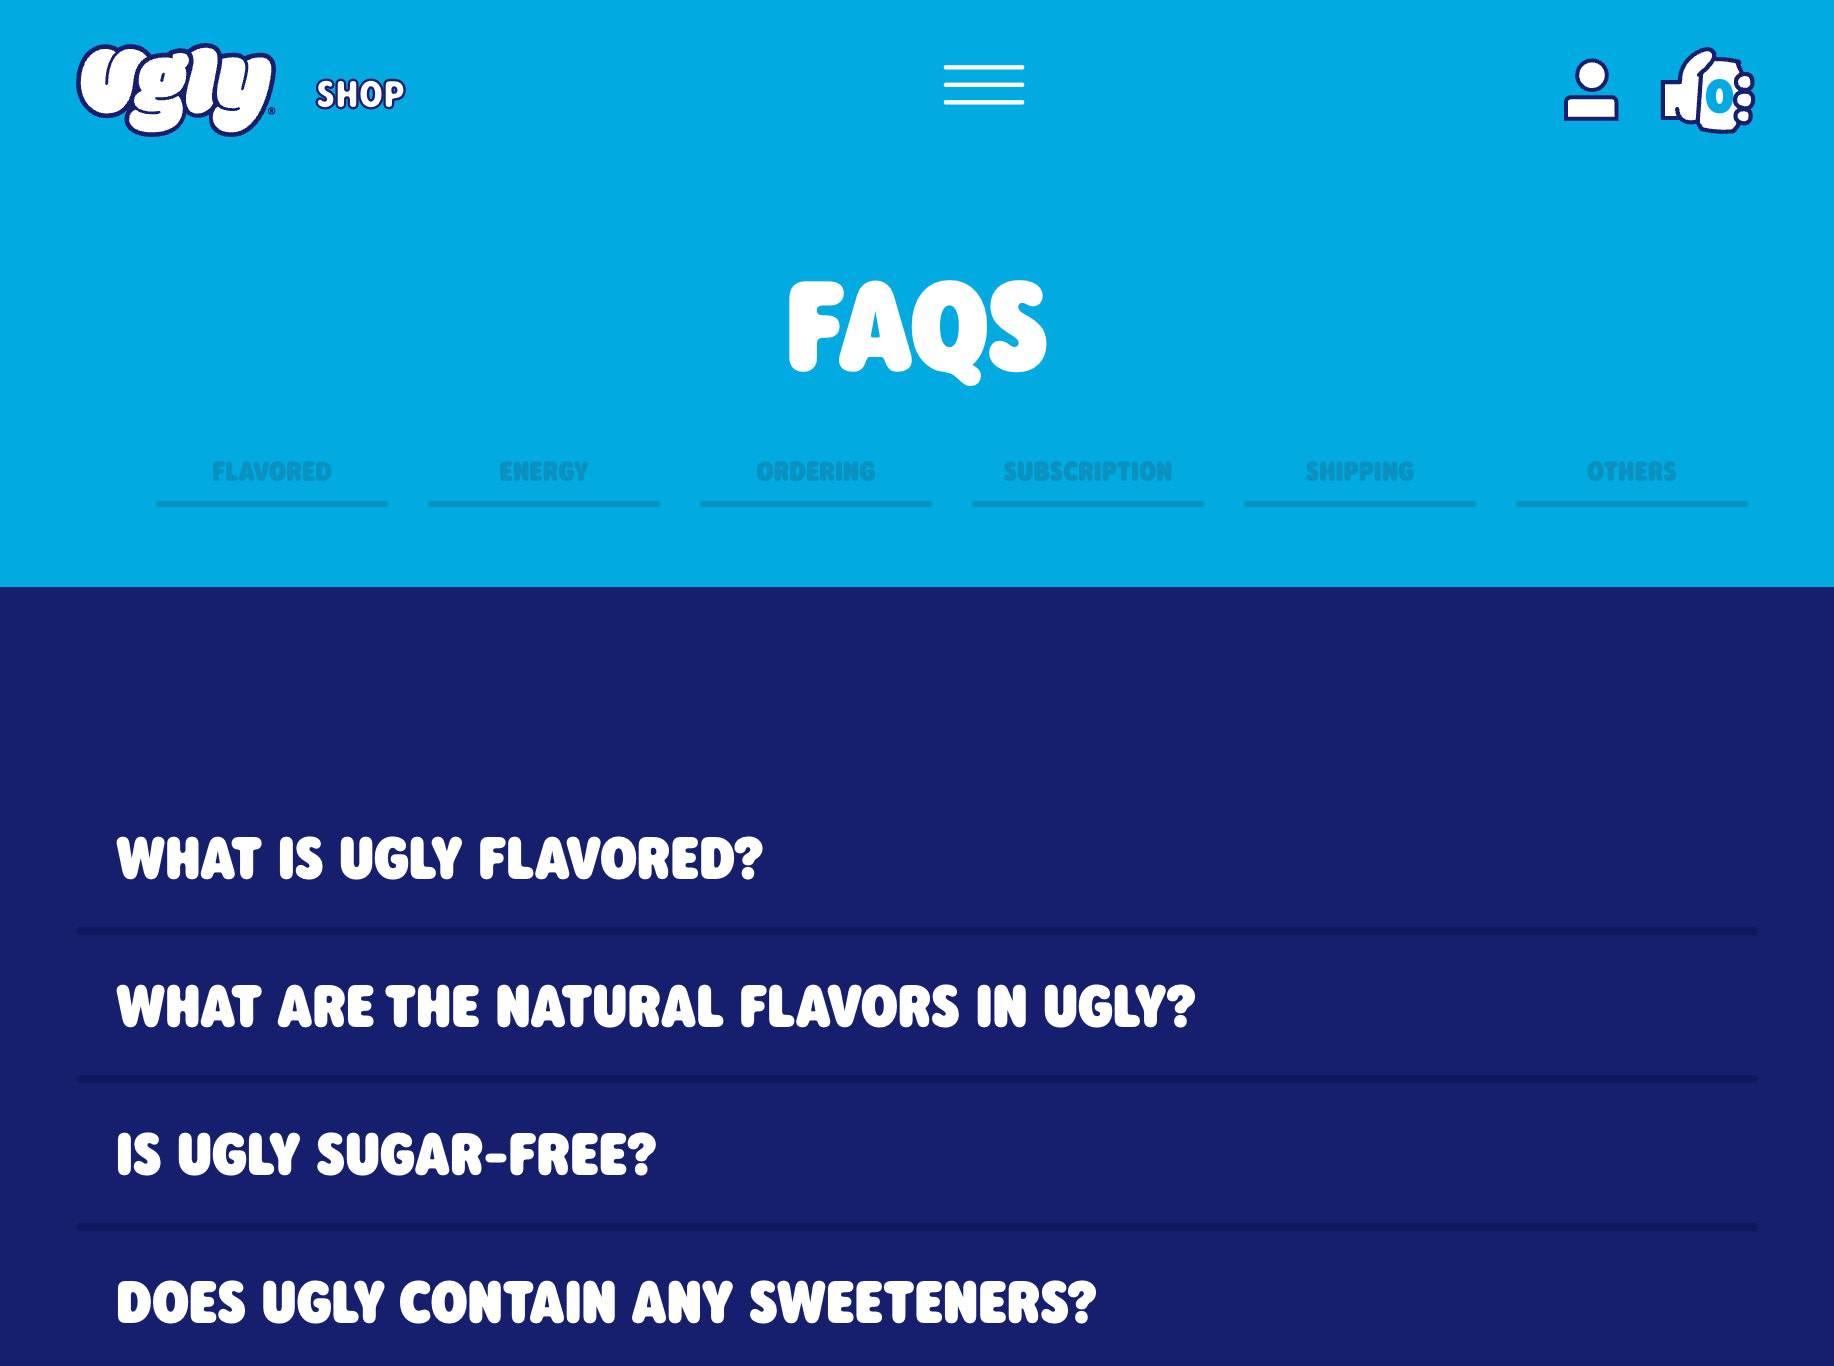 Ecommerce FAQ page for online business Ugly Brands